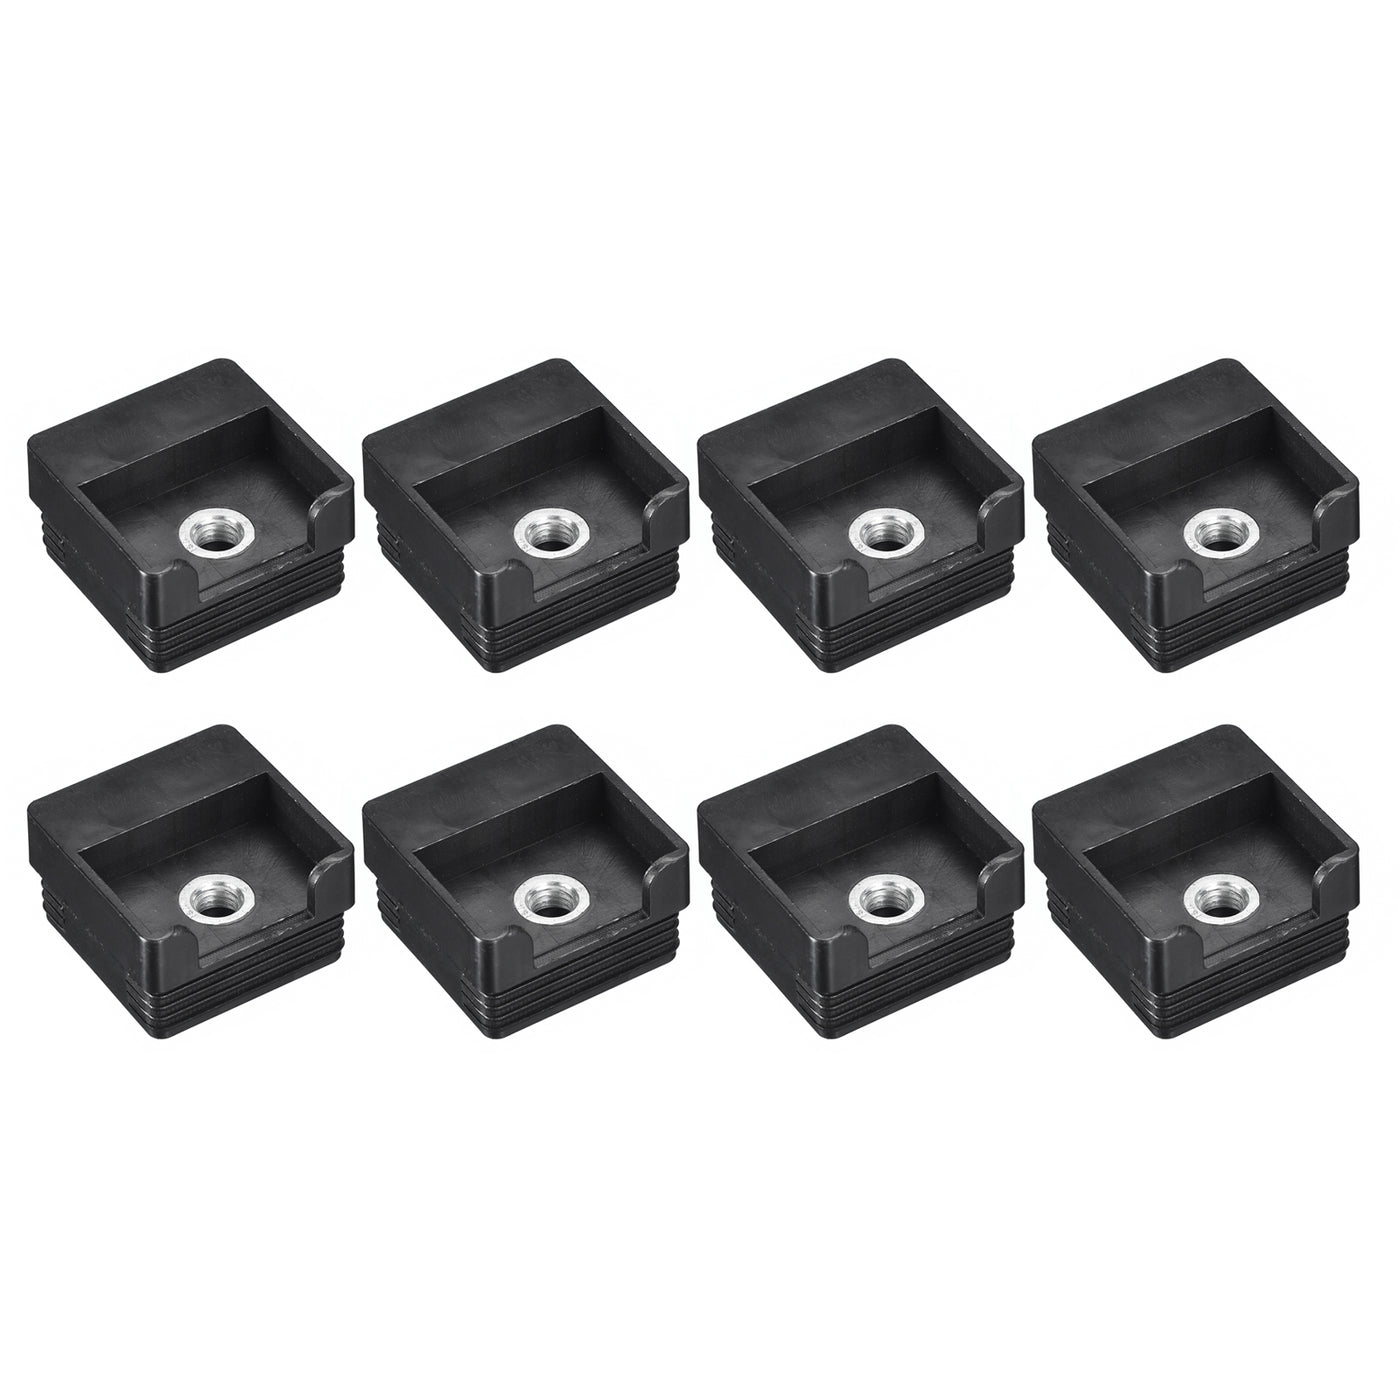 uxcell Uxcell 8Pcs 1.97"x1.97" Caster Insert with Thread, Square M10 Thread for Furniture